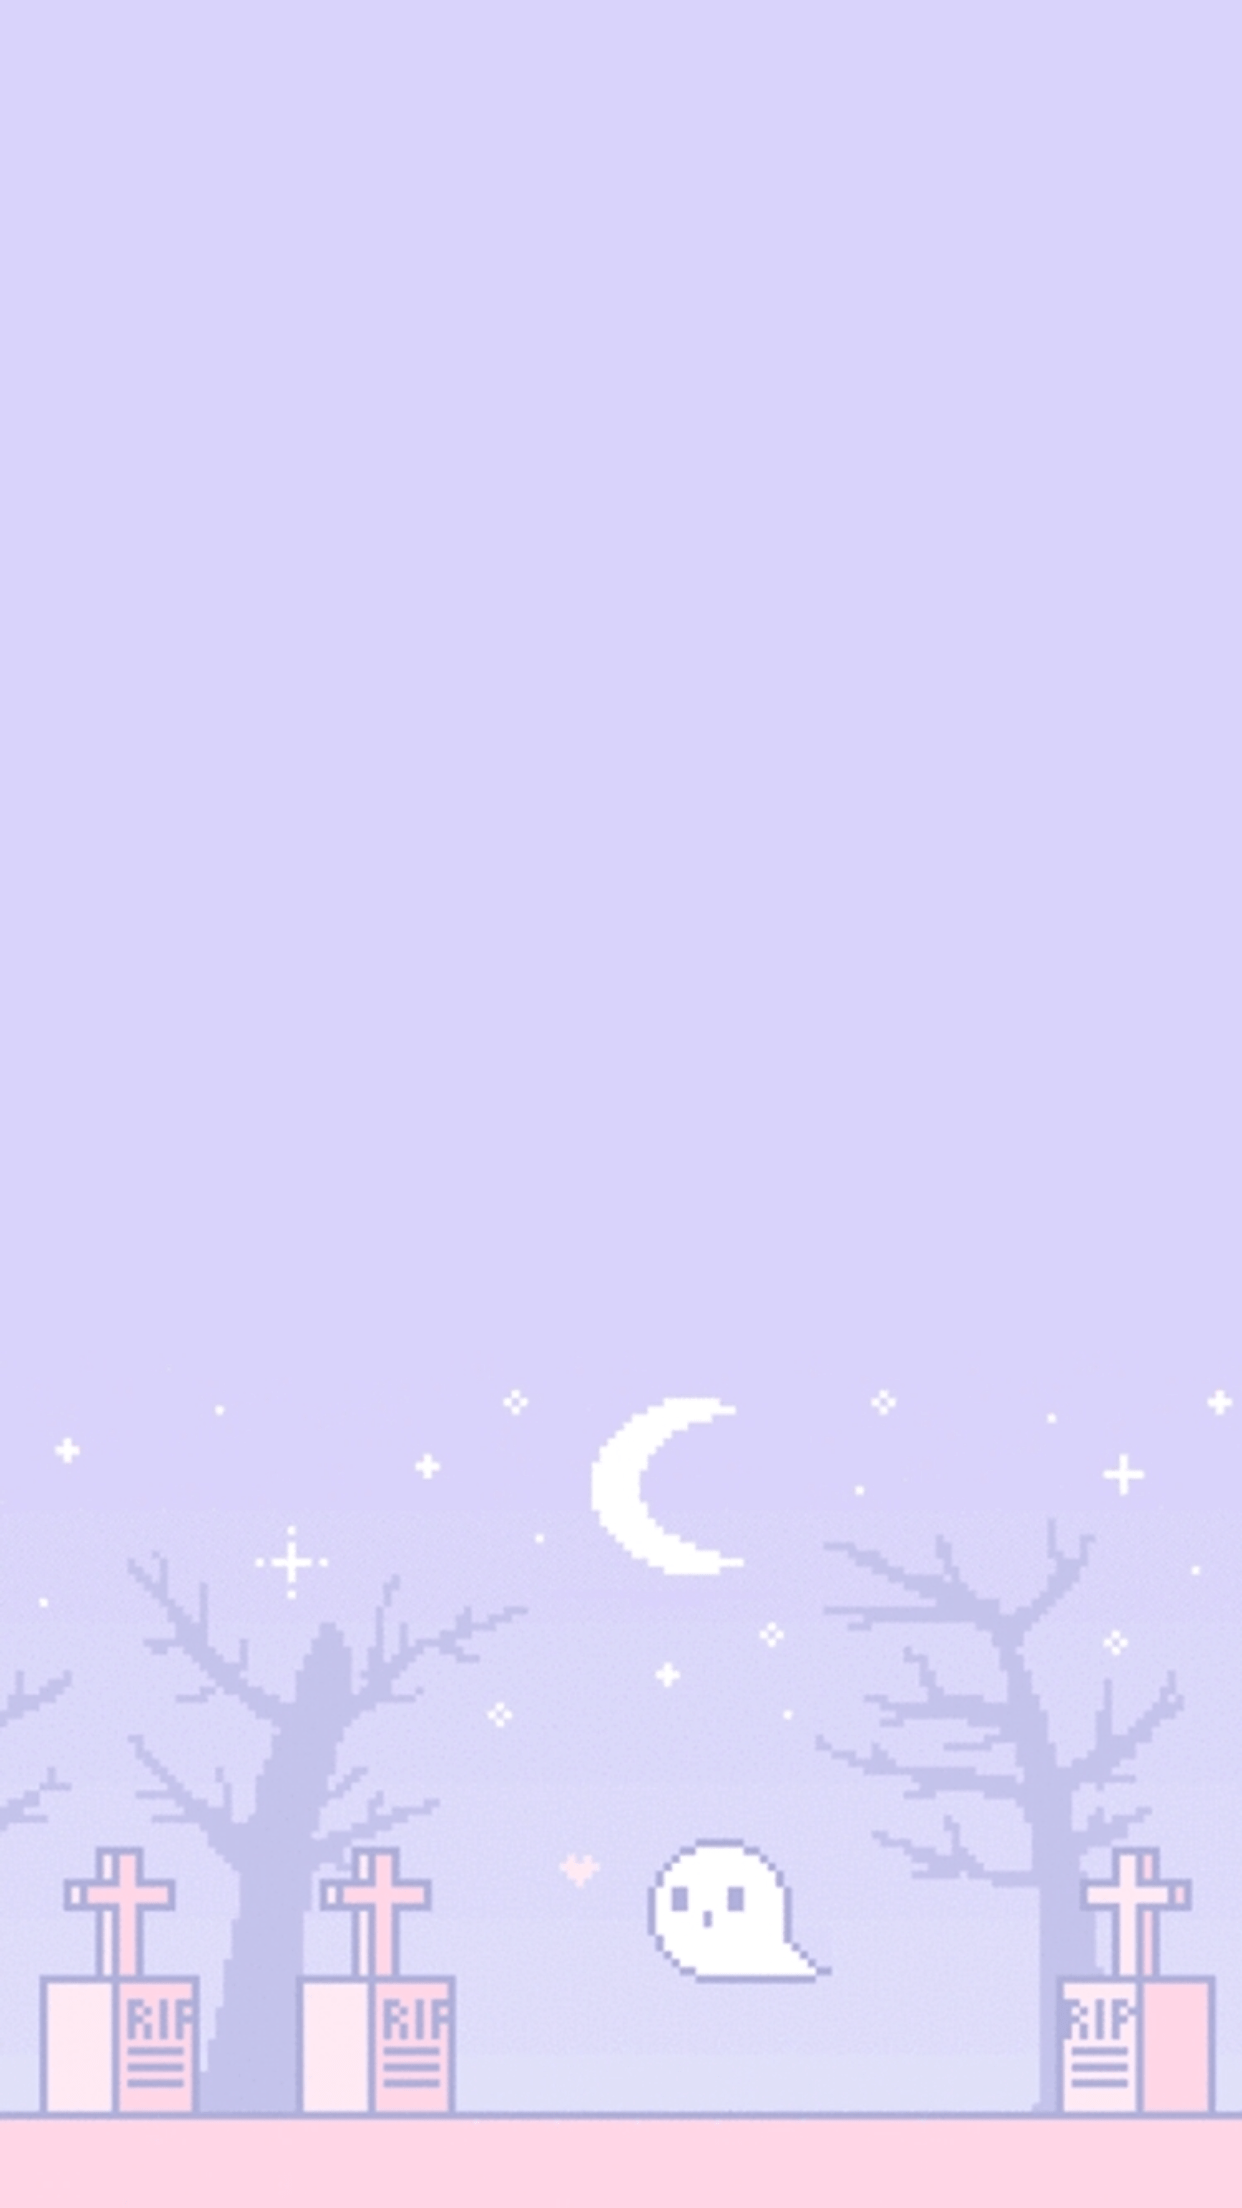 A purple background with ghost and trees - Kawaii, spooky, ghost, pixel art, Halloween, cute Halloween